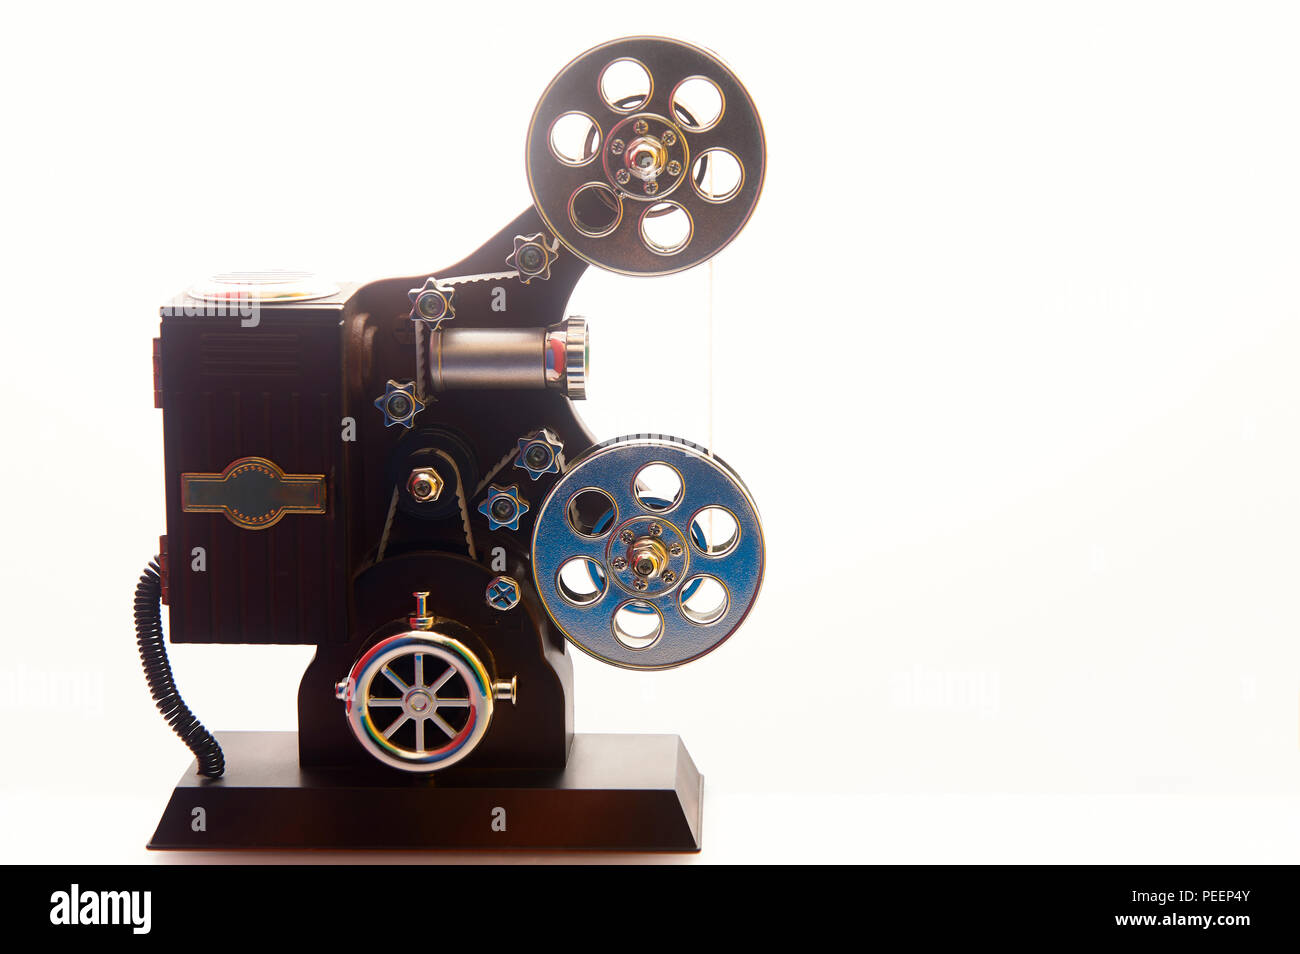 Plastic toy movie projector on a white background Stock Photo